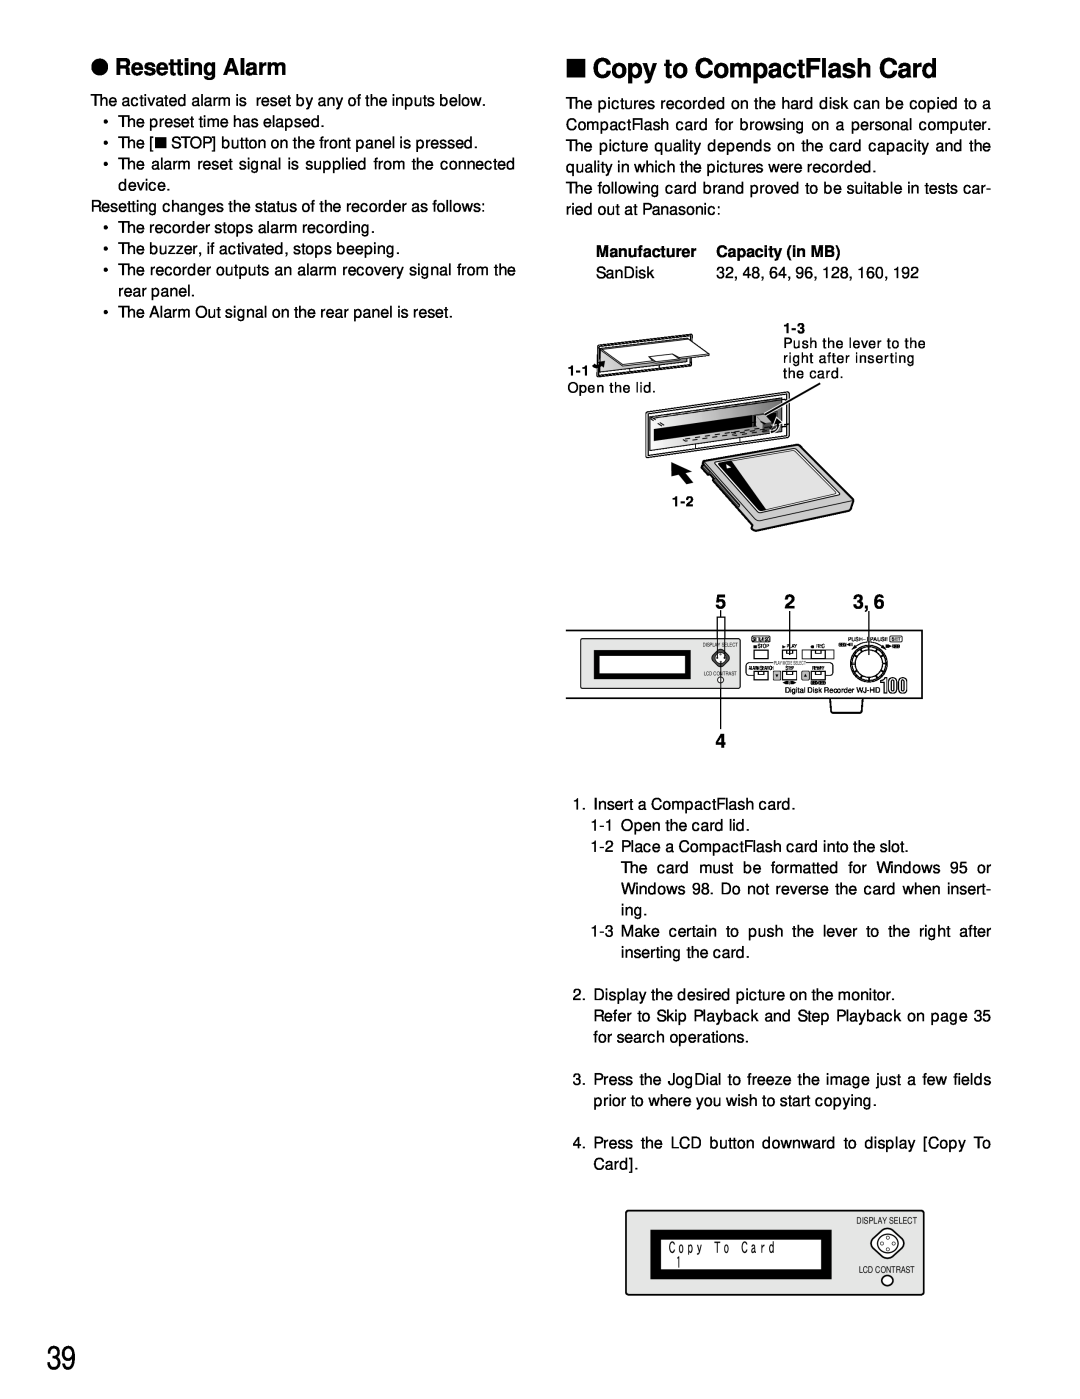 Panasonic WJ-HD100 operating instructions Copy to CompactFlash Card, Resetting Alarm, Manufacturer, Capacity in MB, SanDisk 